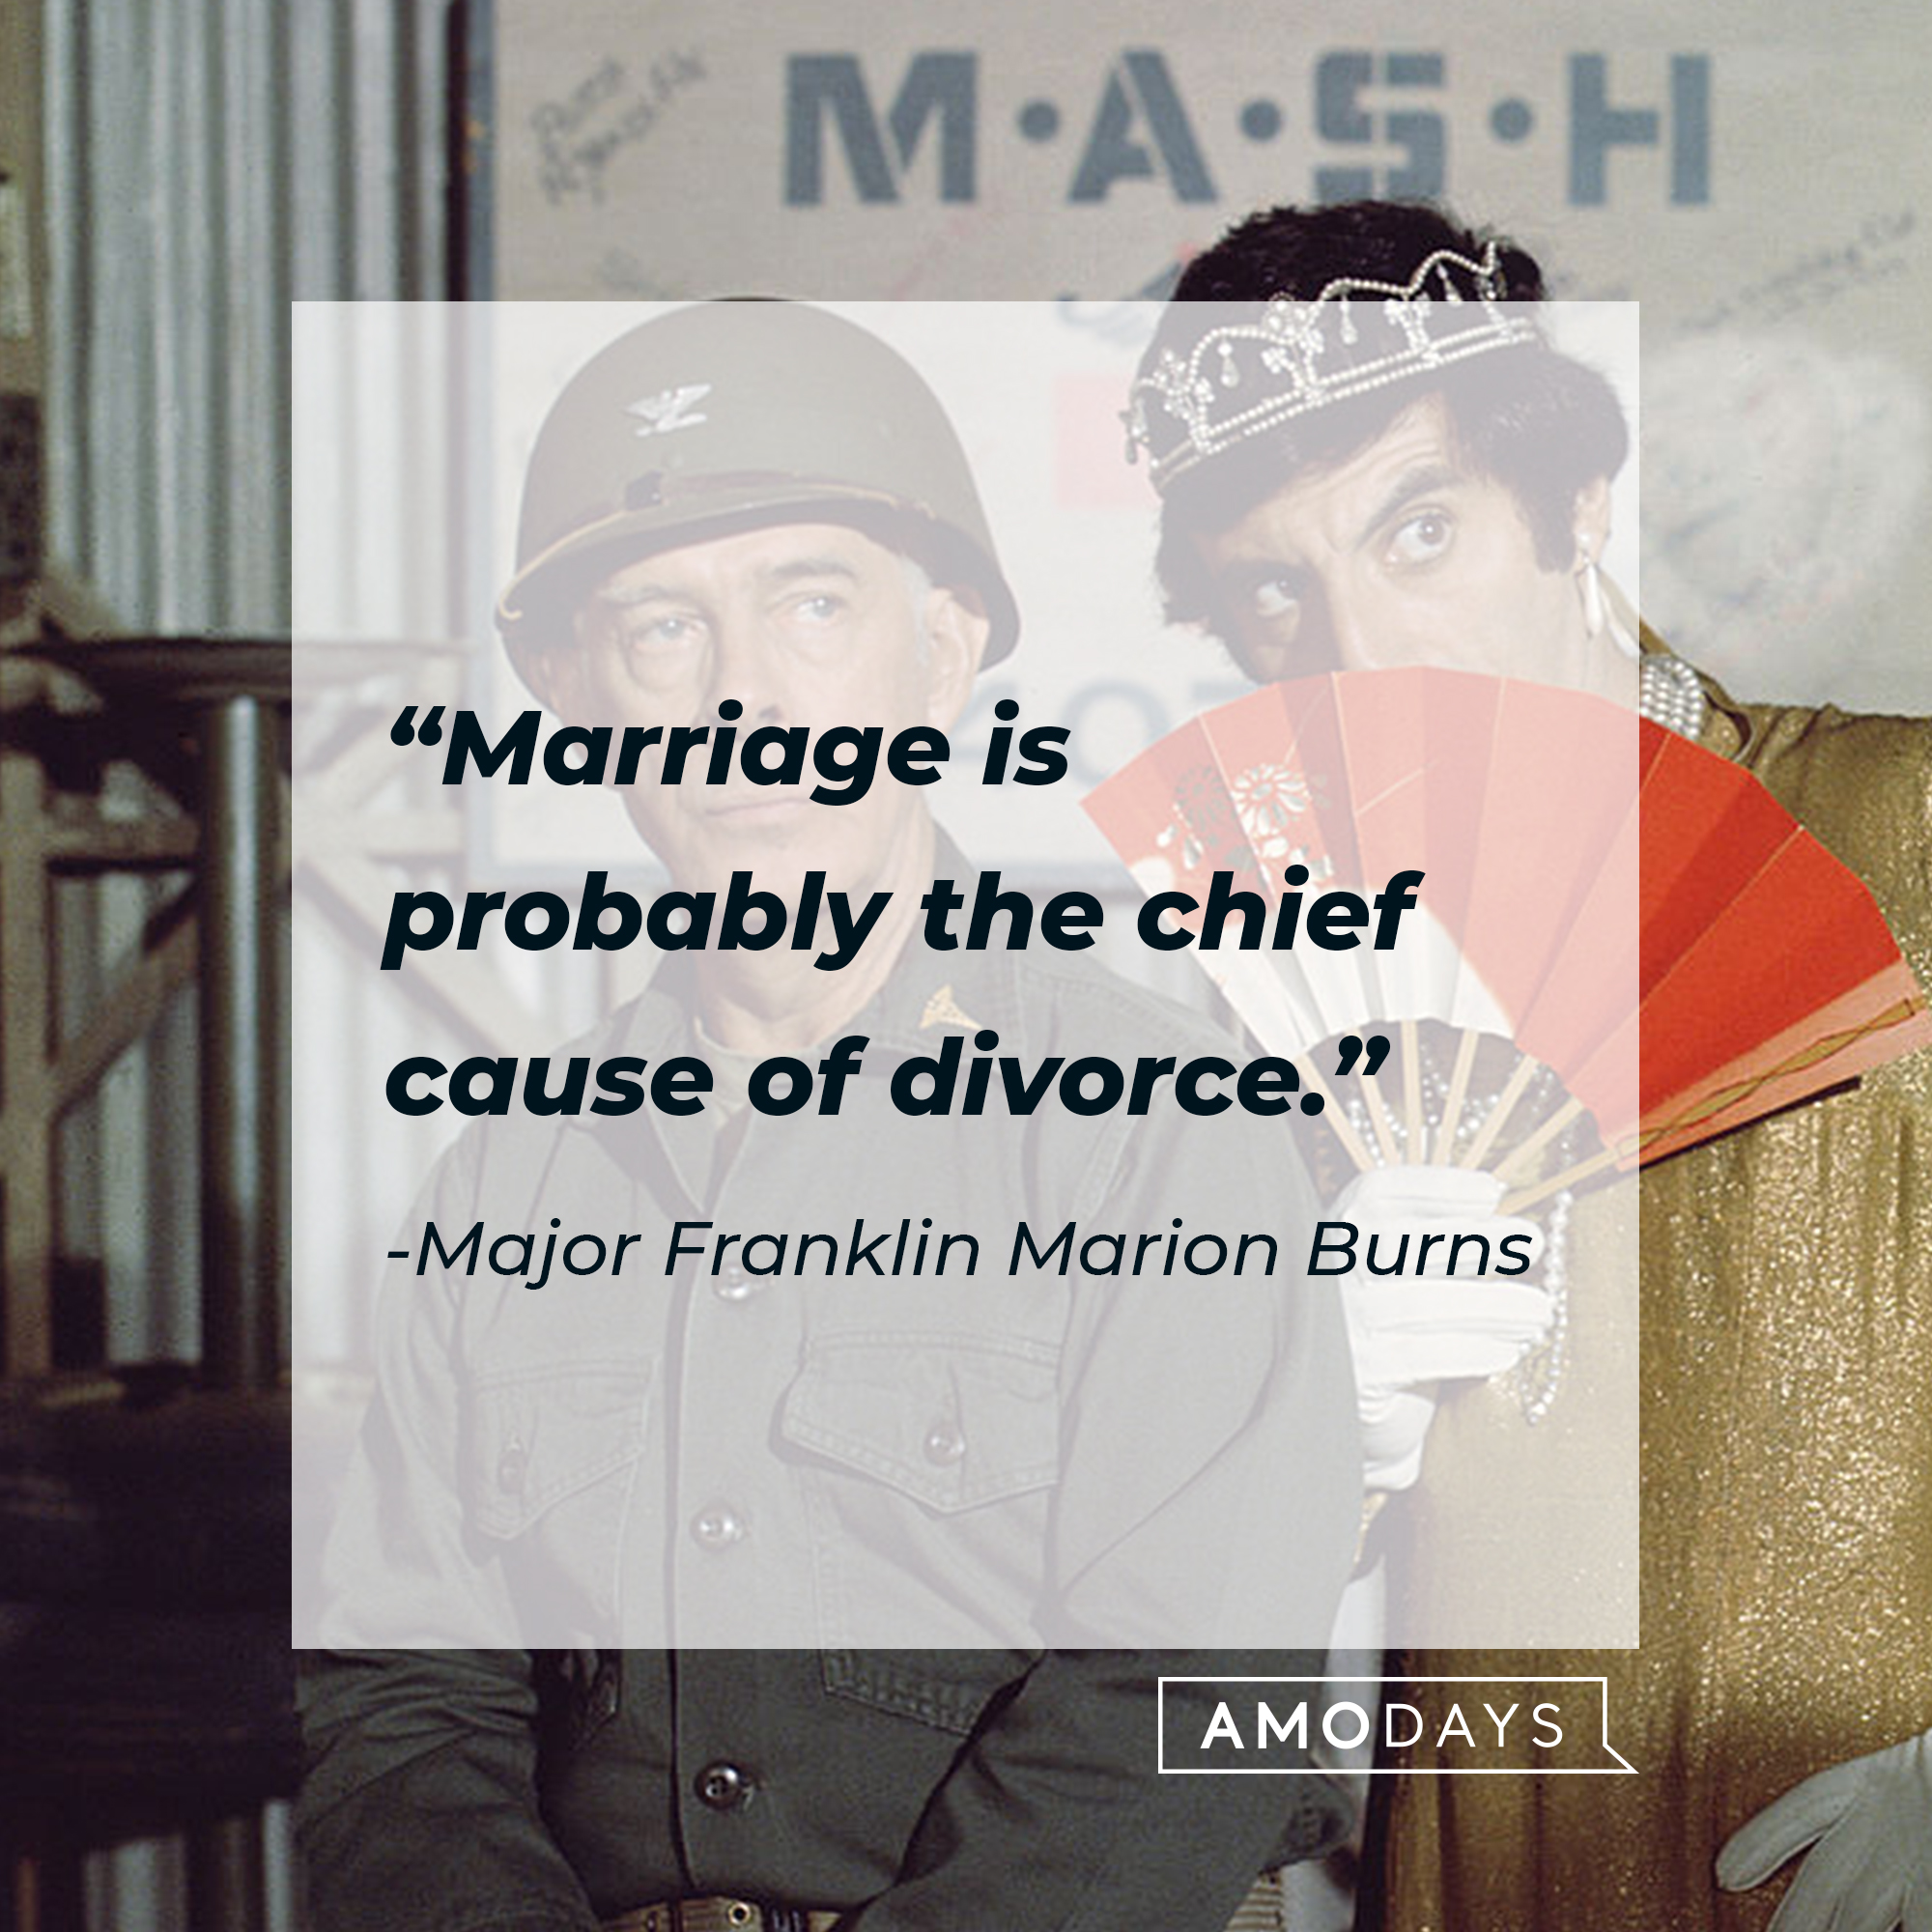 Major Franklin Marion Burns' quote: "Marriage is probably the chief cause of divorce." | Source: Getty Images